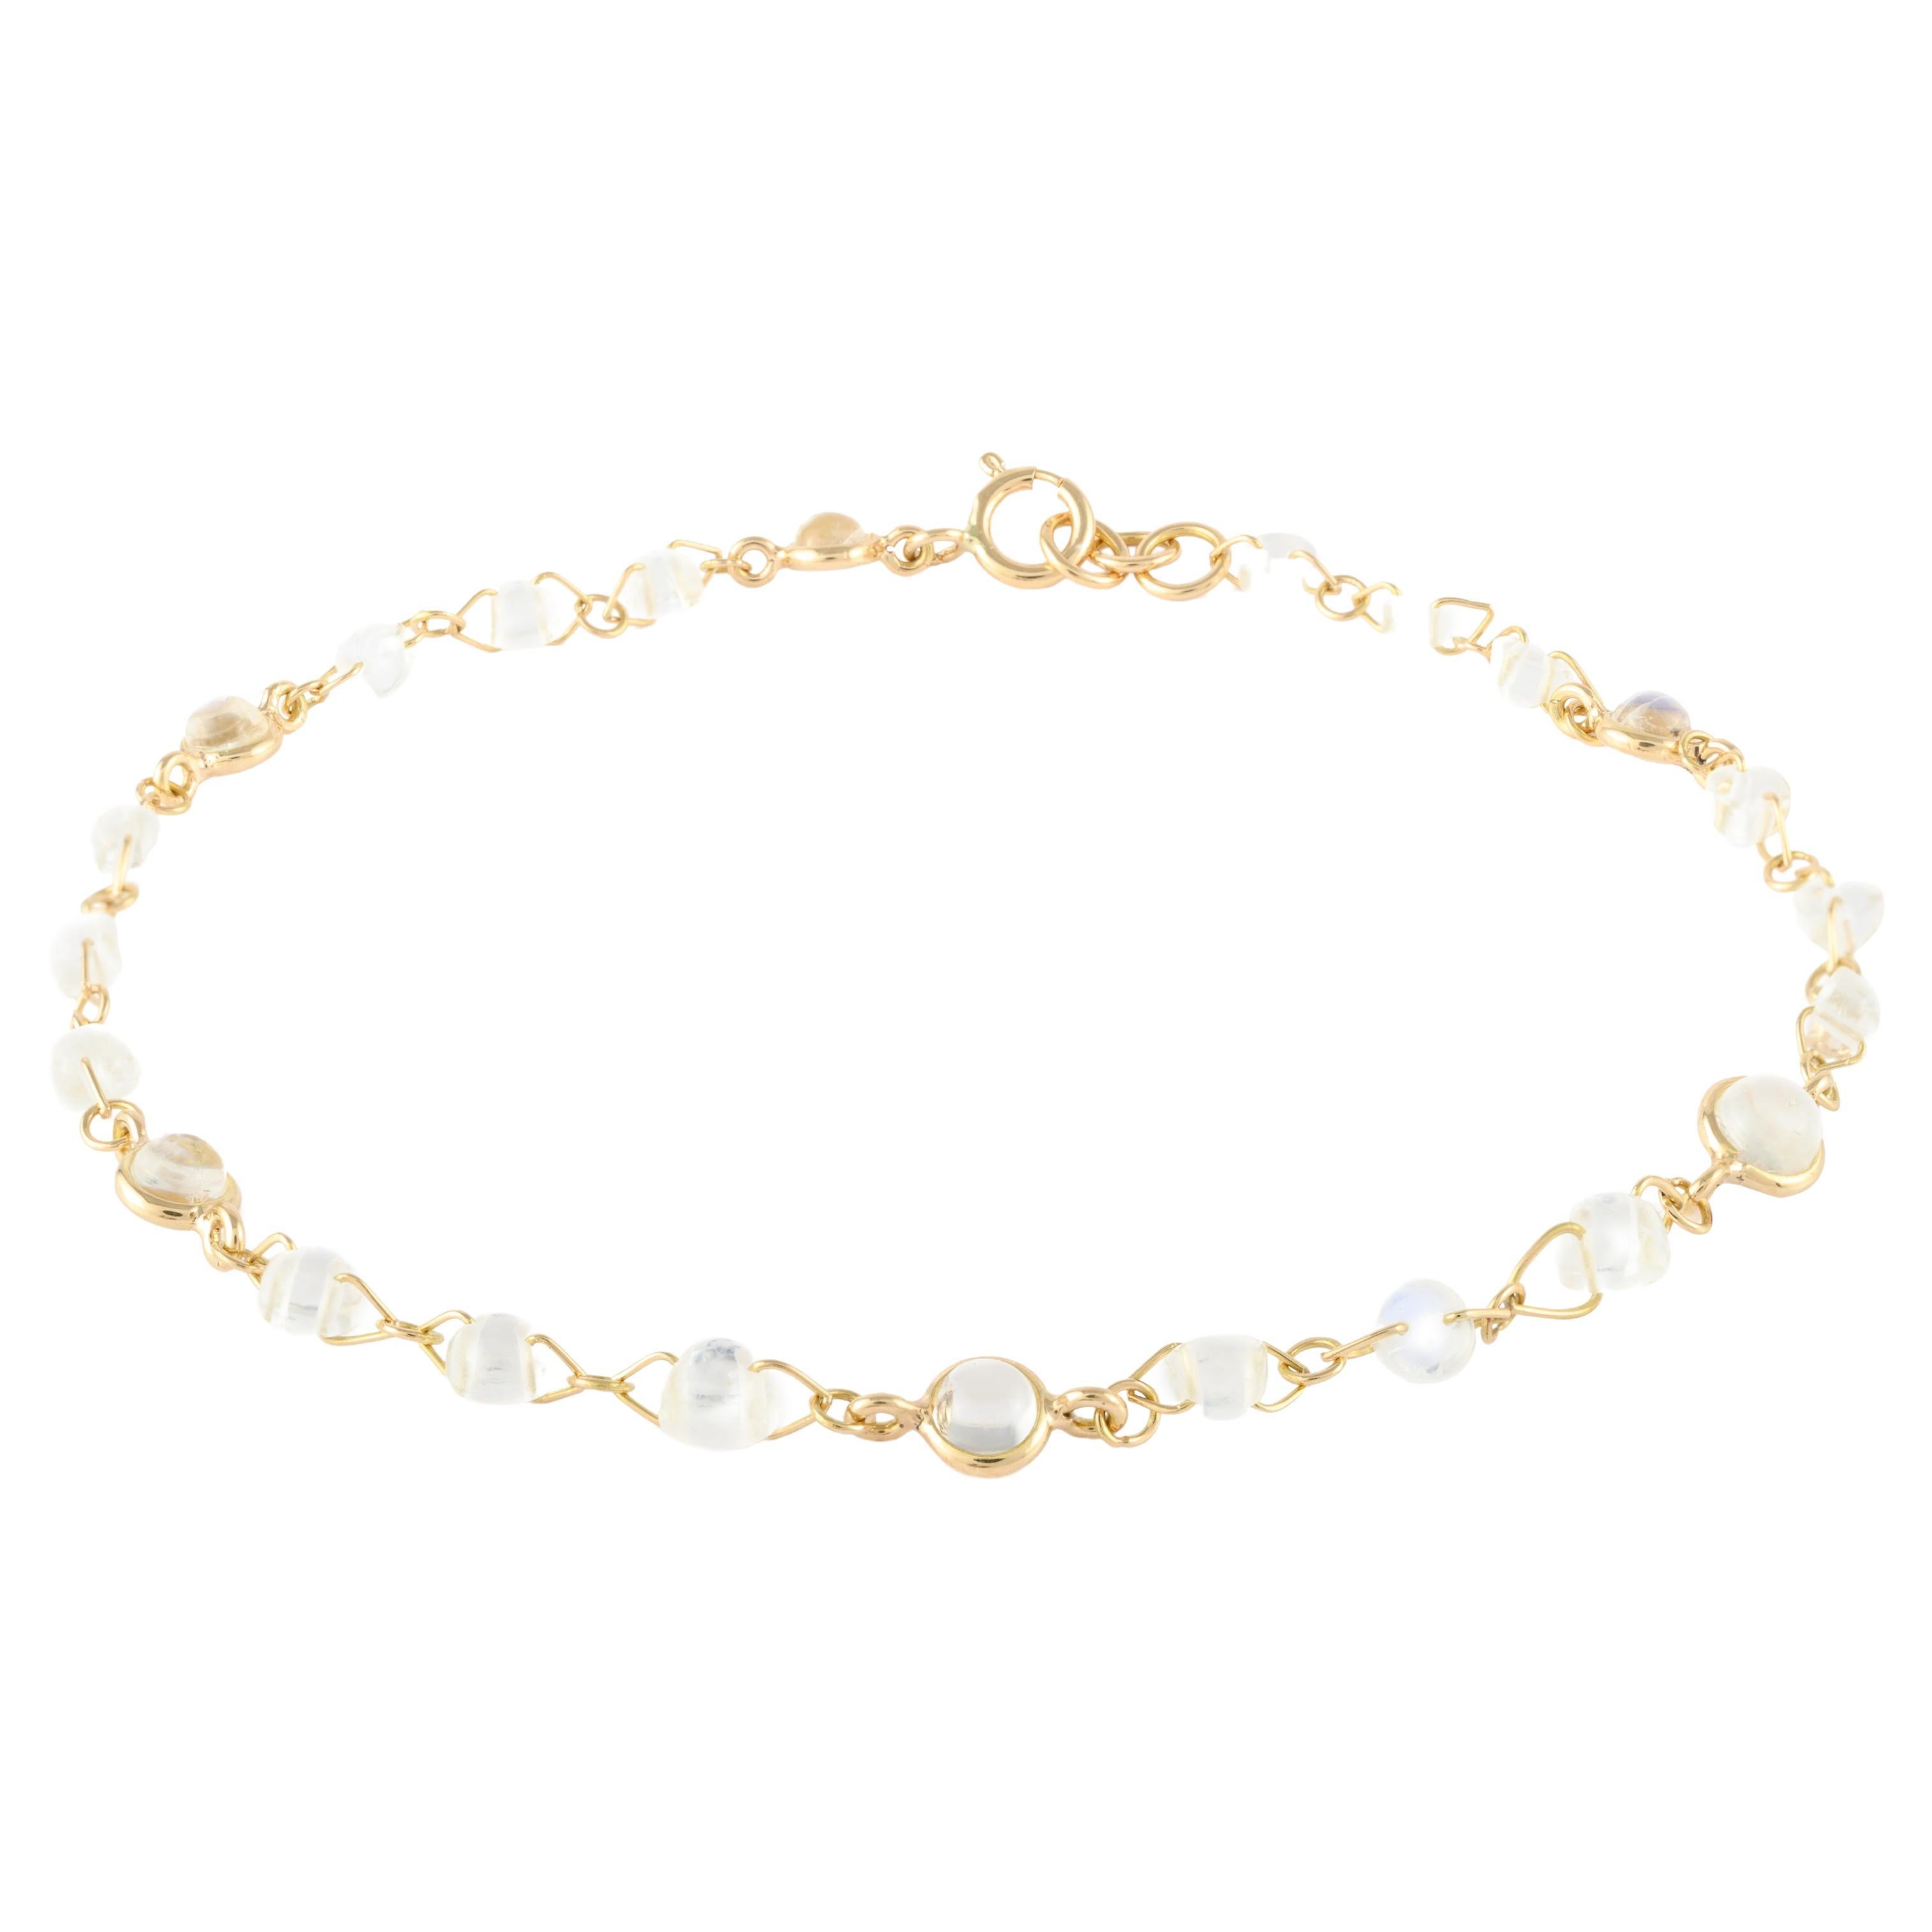 Solid 18k Yellow Gold 6.29 Carat Rainbow Moonstone Chain Bracelet For Sale